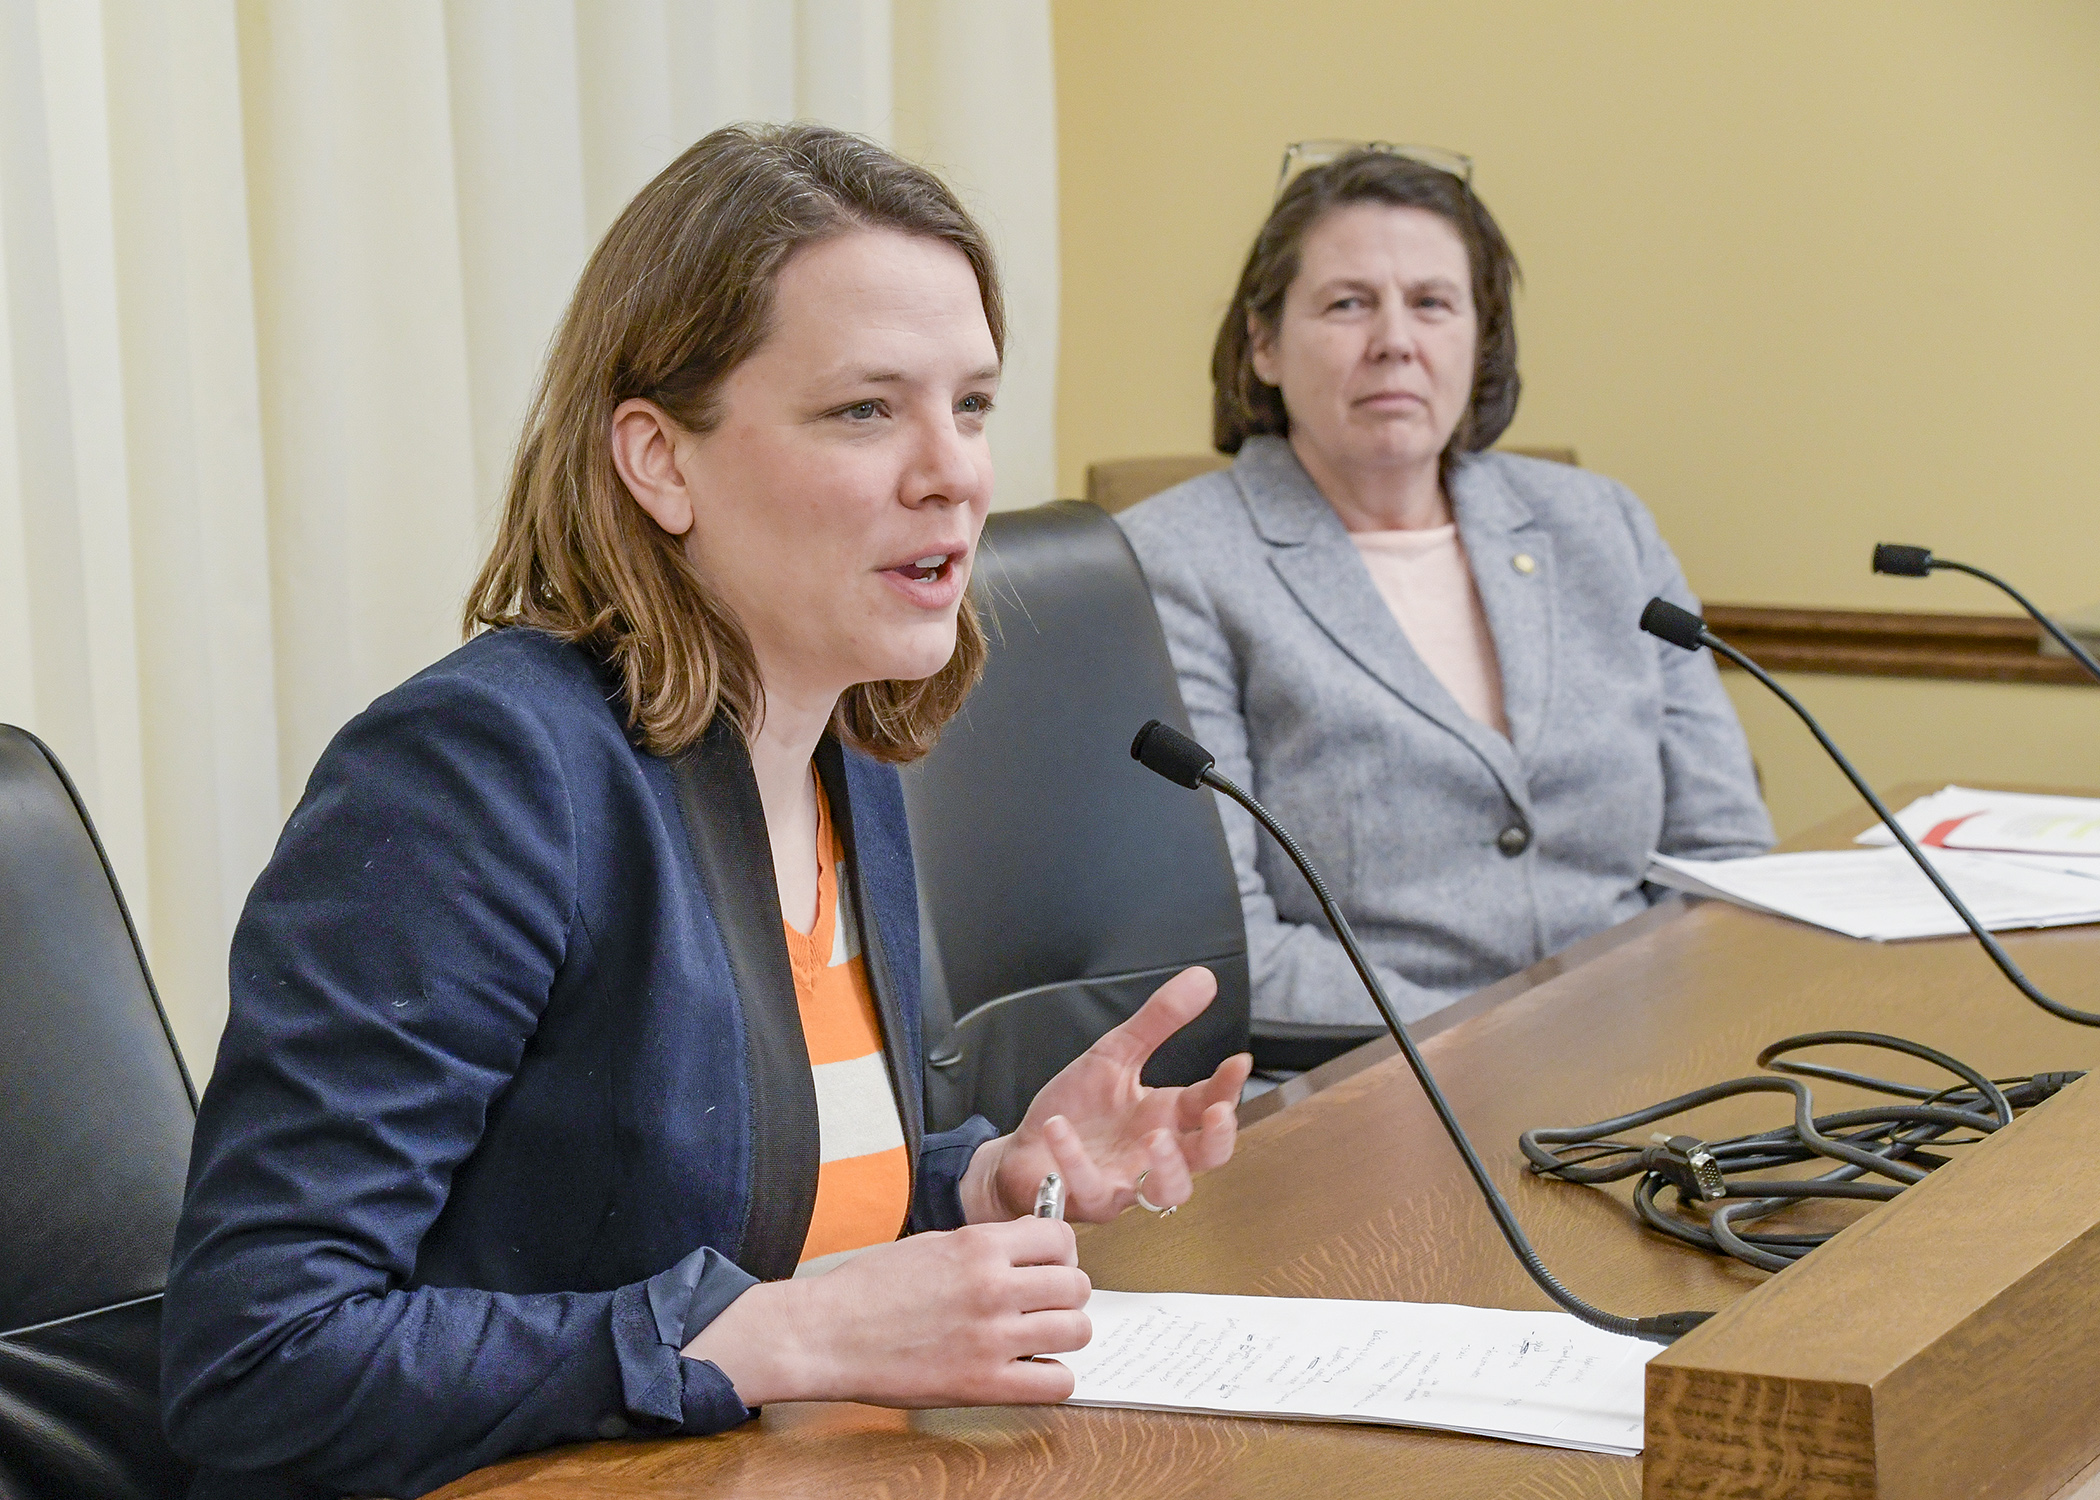 Kate Knuth, climate policy advisor for the Minnesota Center for Environmental Advocacy, testifies Feb. 20 in support of a bill sponsored by Rep. Patty Acomb, right, that would establish various energy grant programs. Photo by Andrew VonBank